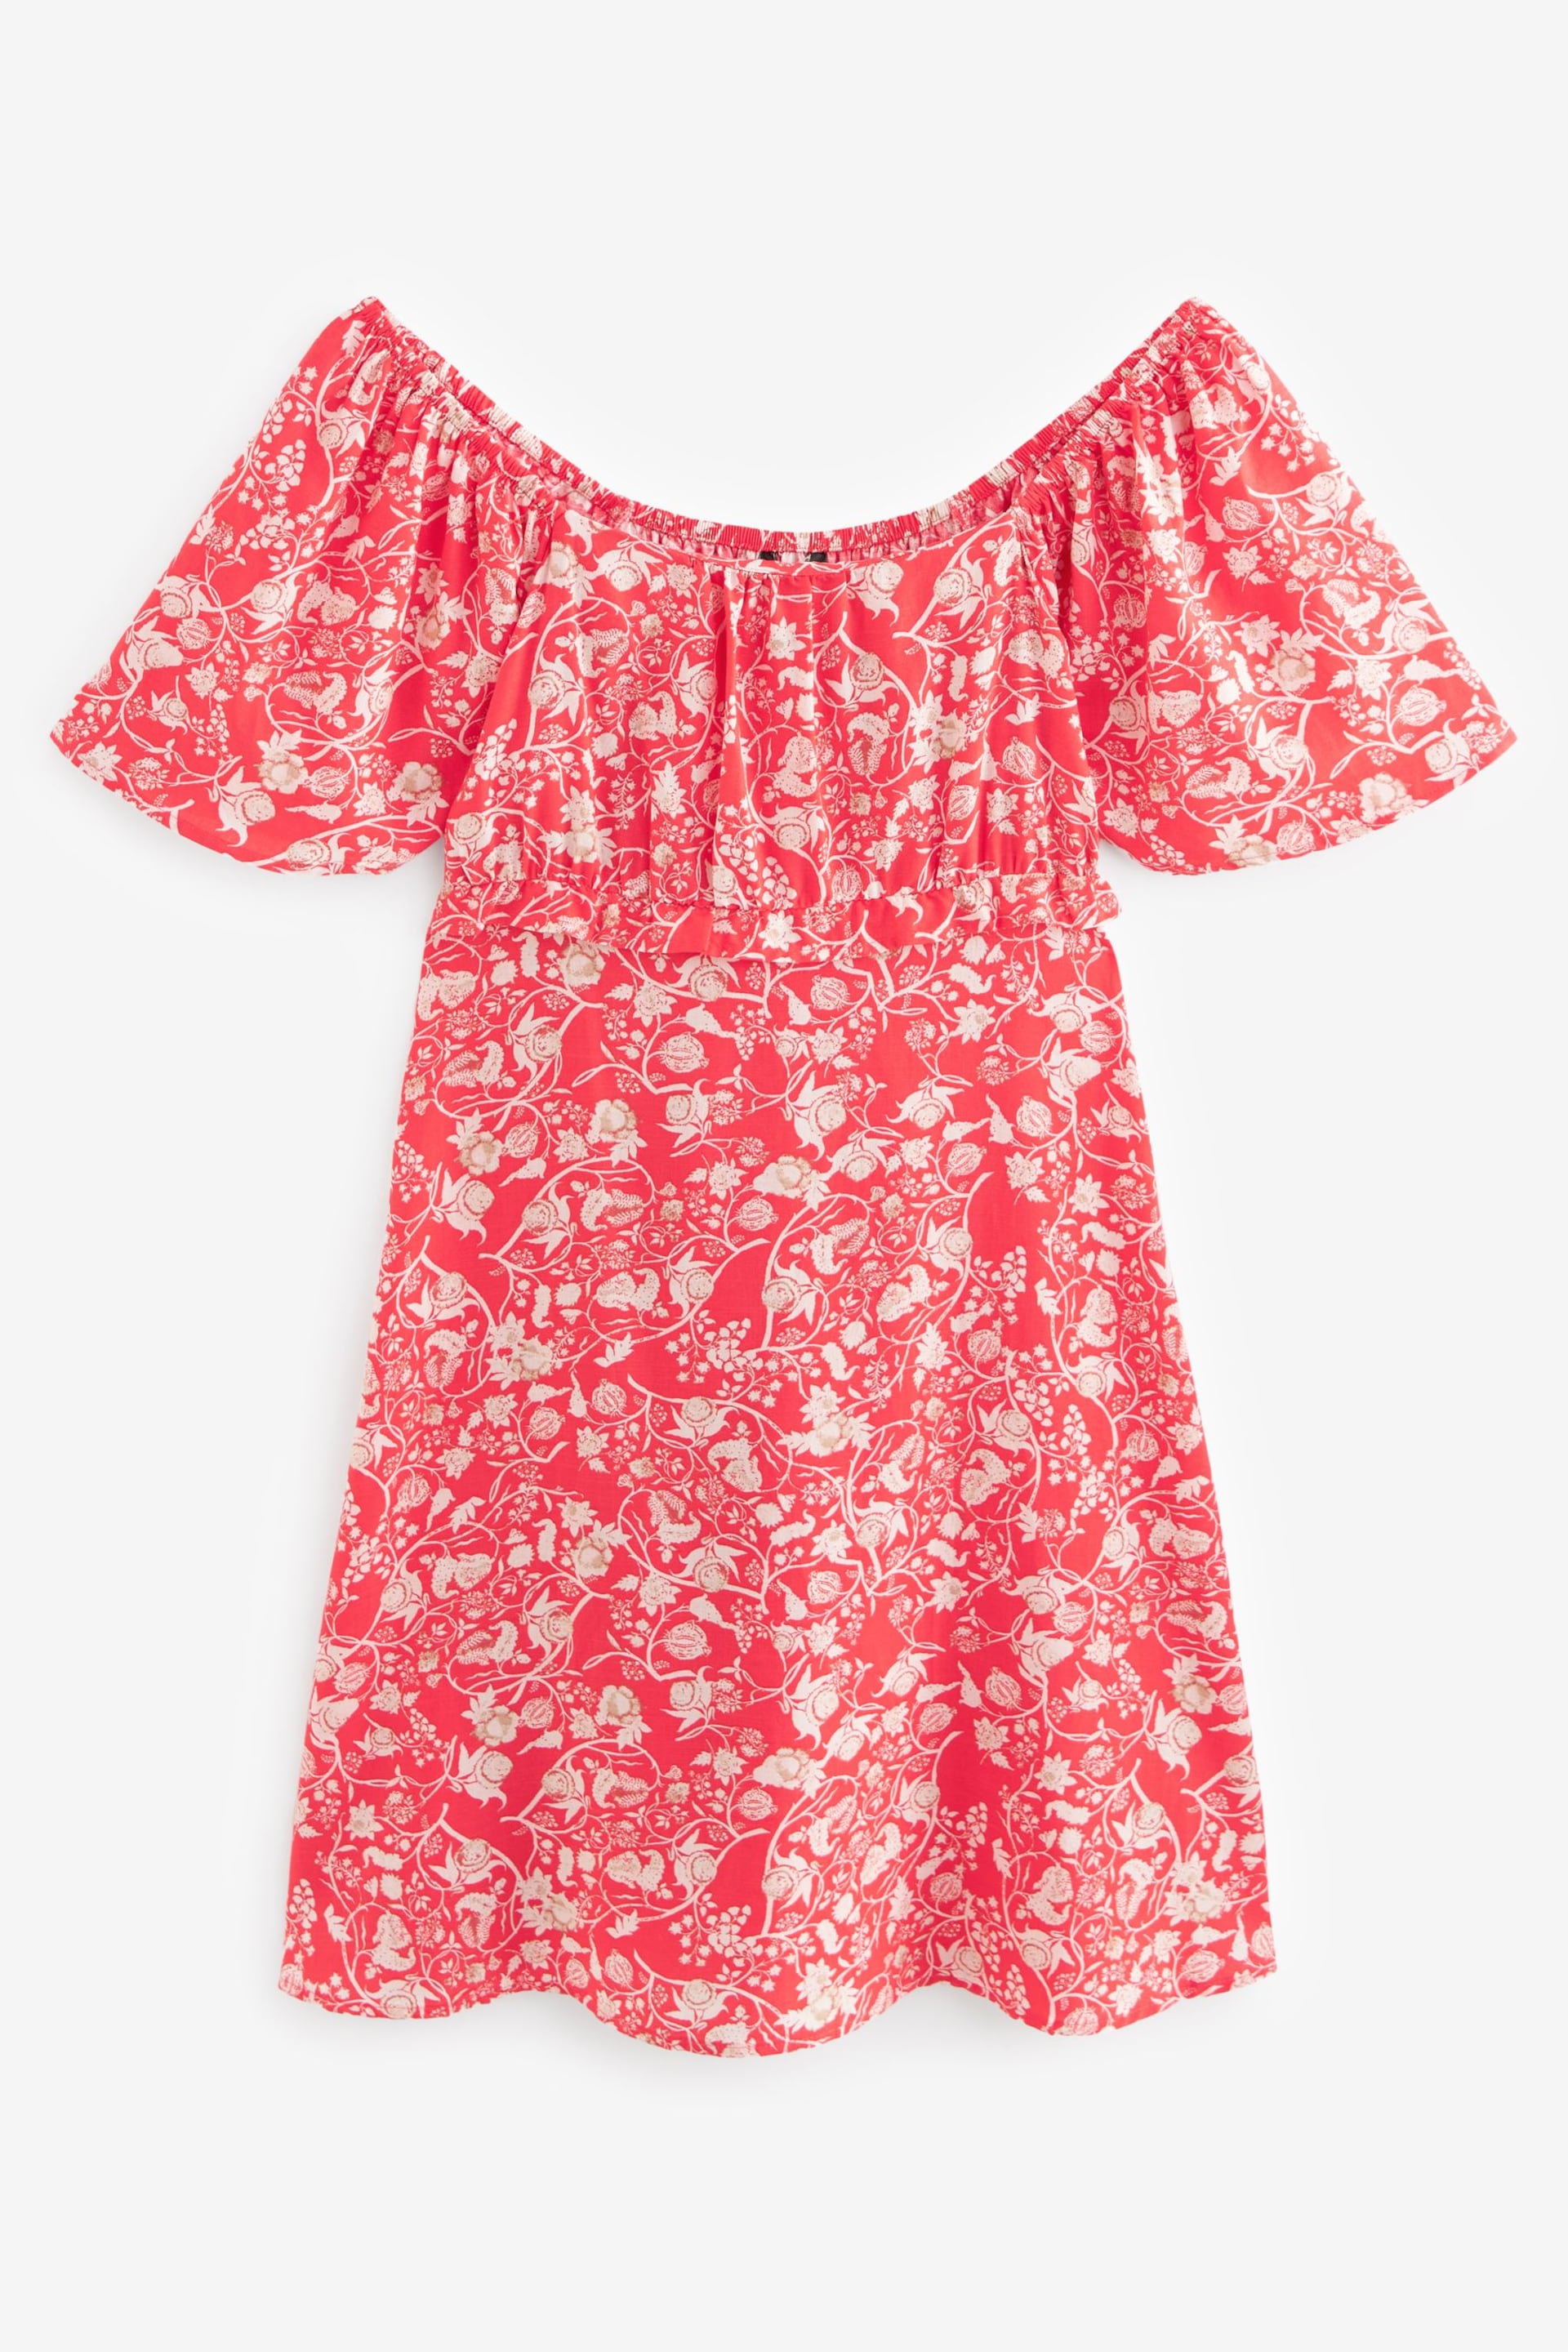 Red/White Ditsy Floral Print Flutter Sleeve Summer Mini Dress - Image 5 of 6